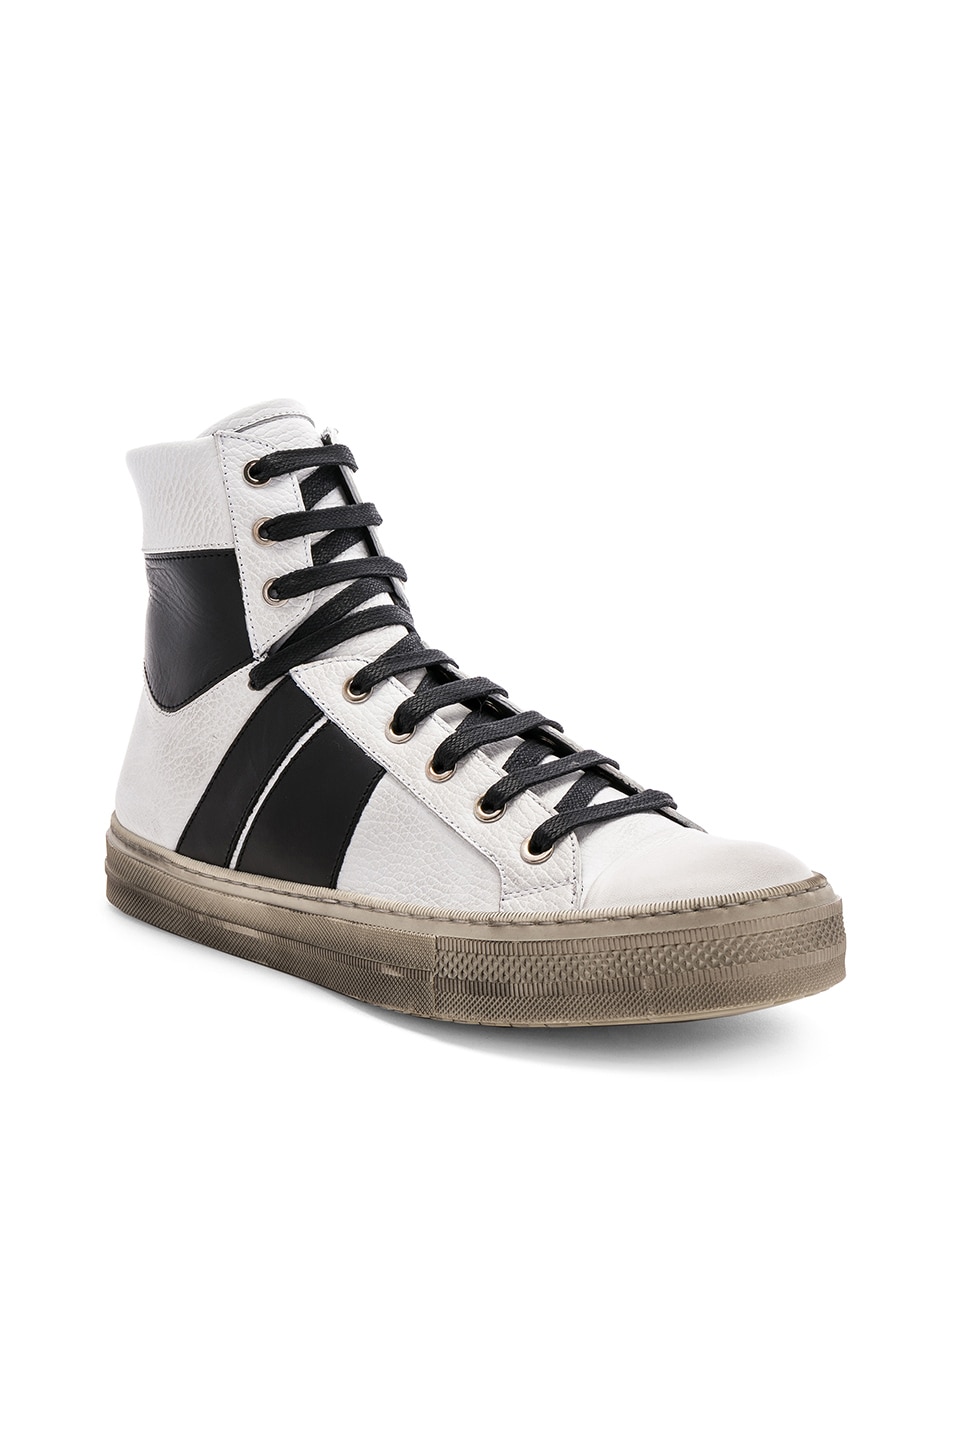 Image 1 of Amiri Leather Sunset Vintage Sneakers in White & Black